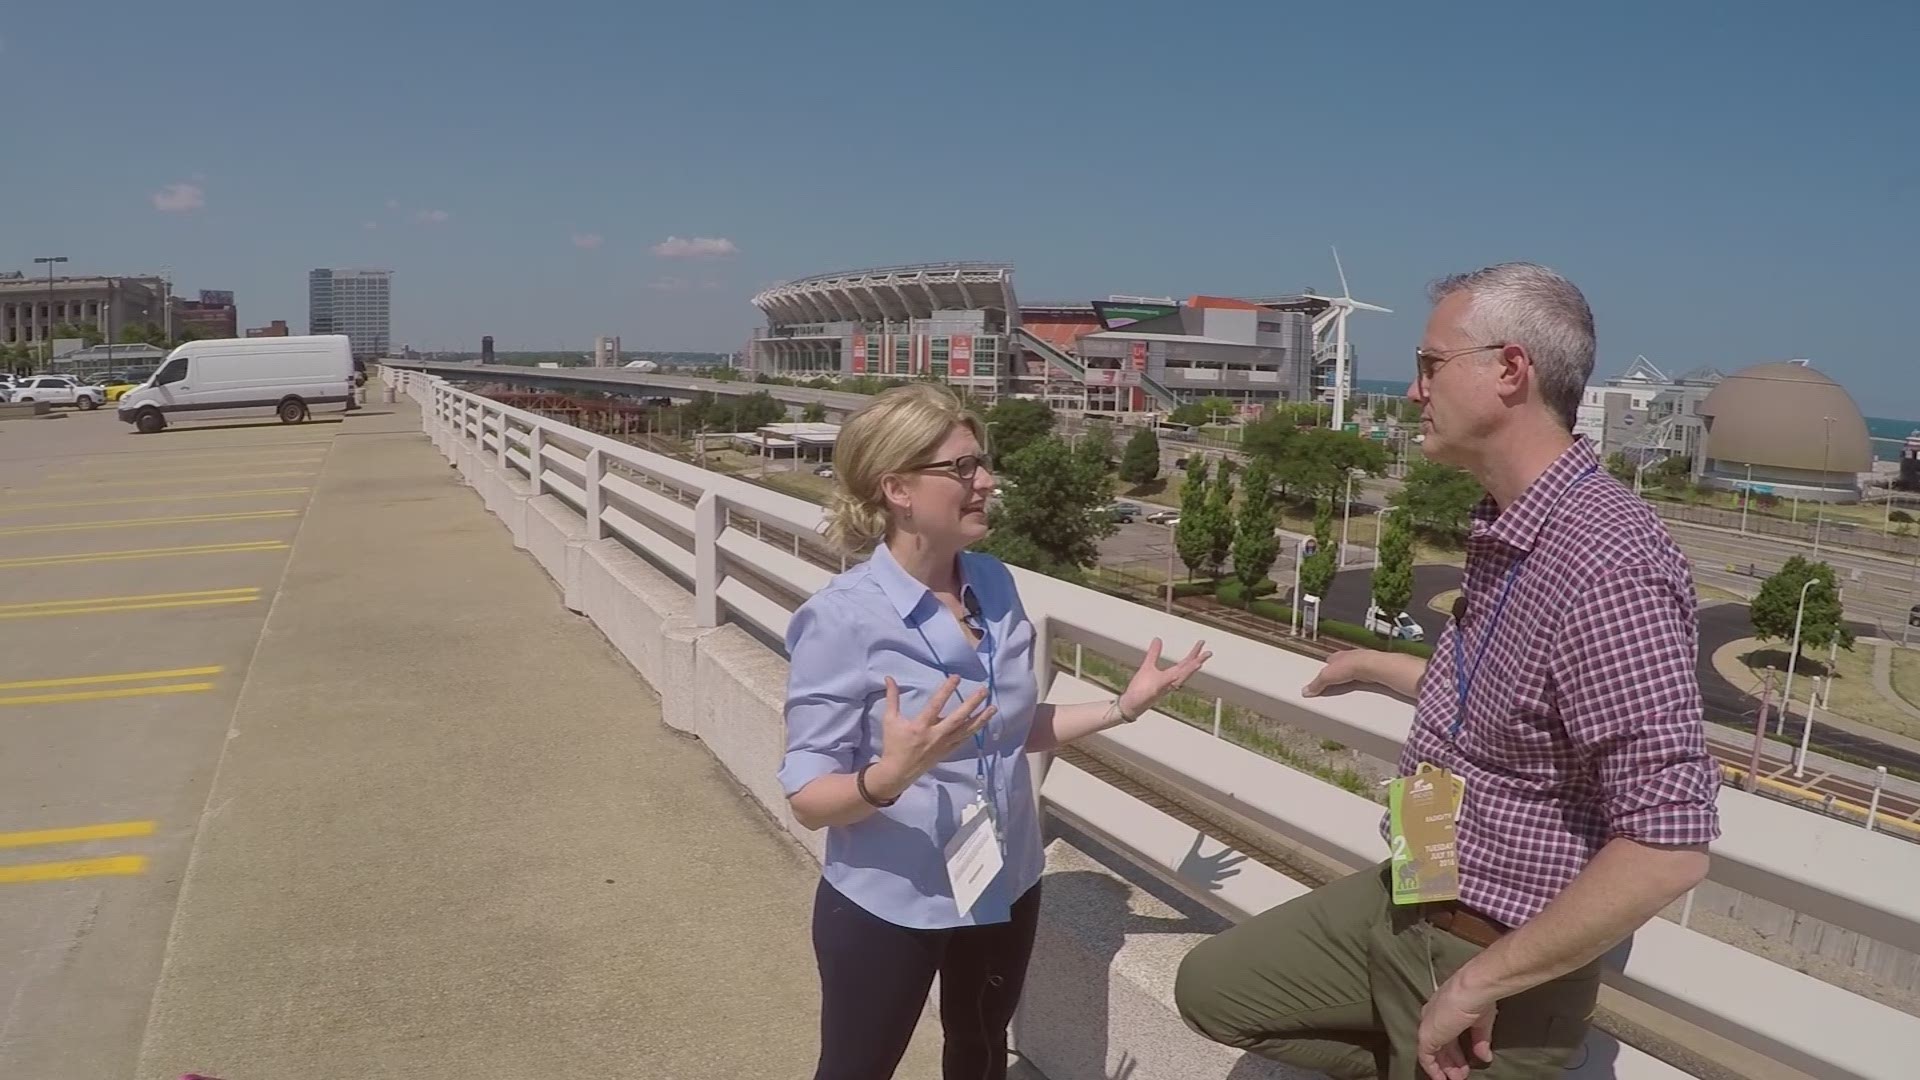 In his segment, called Verify, reporter David Schechter takes real people out to get their questions answered.  Laura Jones wants to know if reporters at the GOP conventions are able to keep their opinions out of their stories.